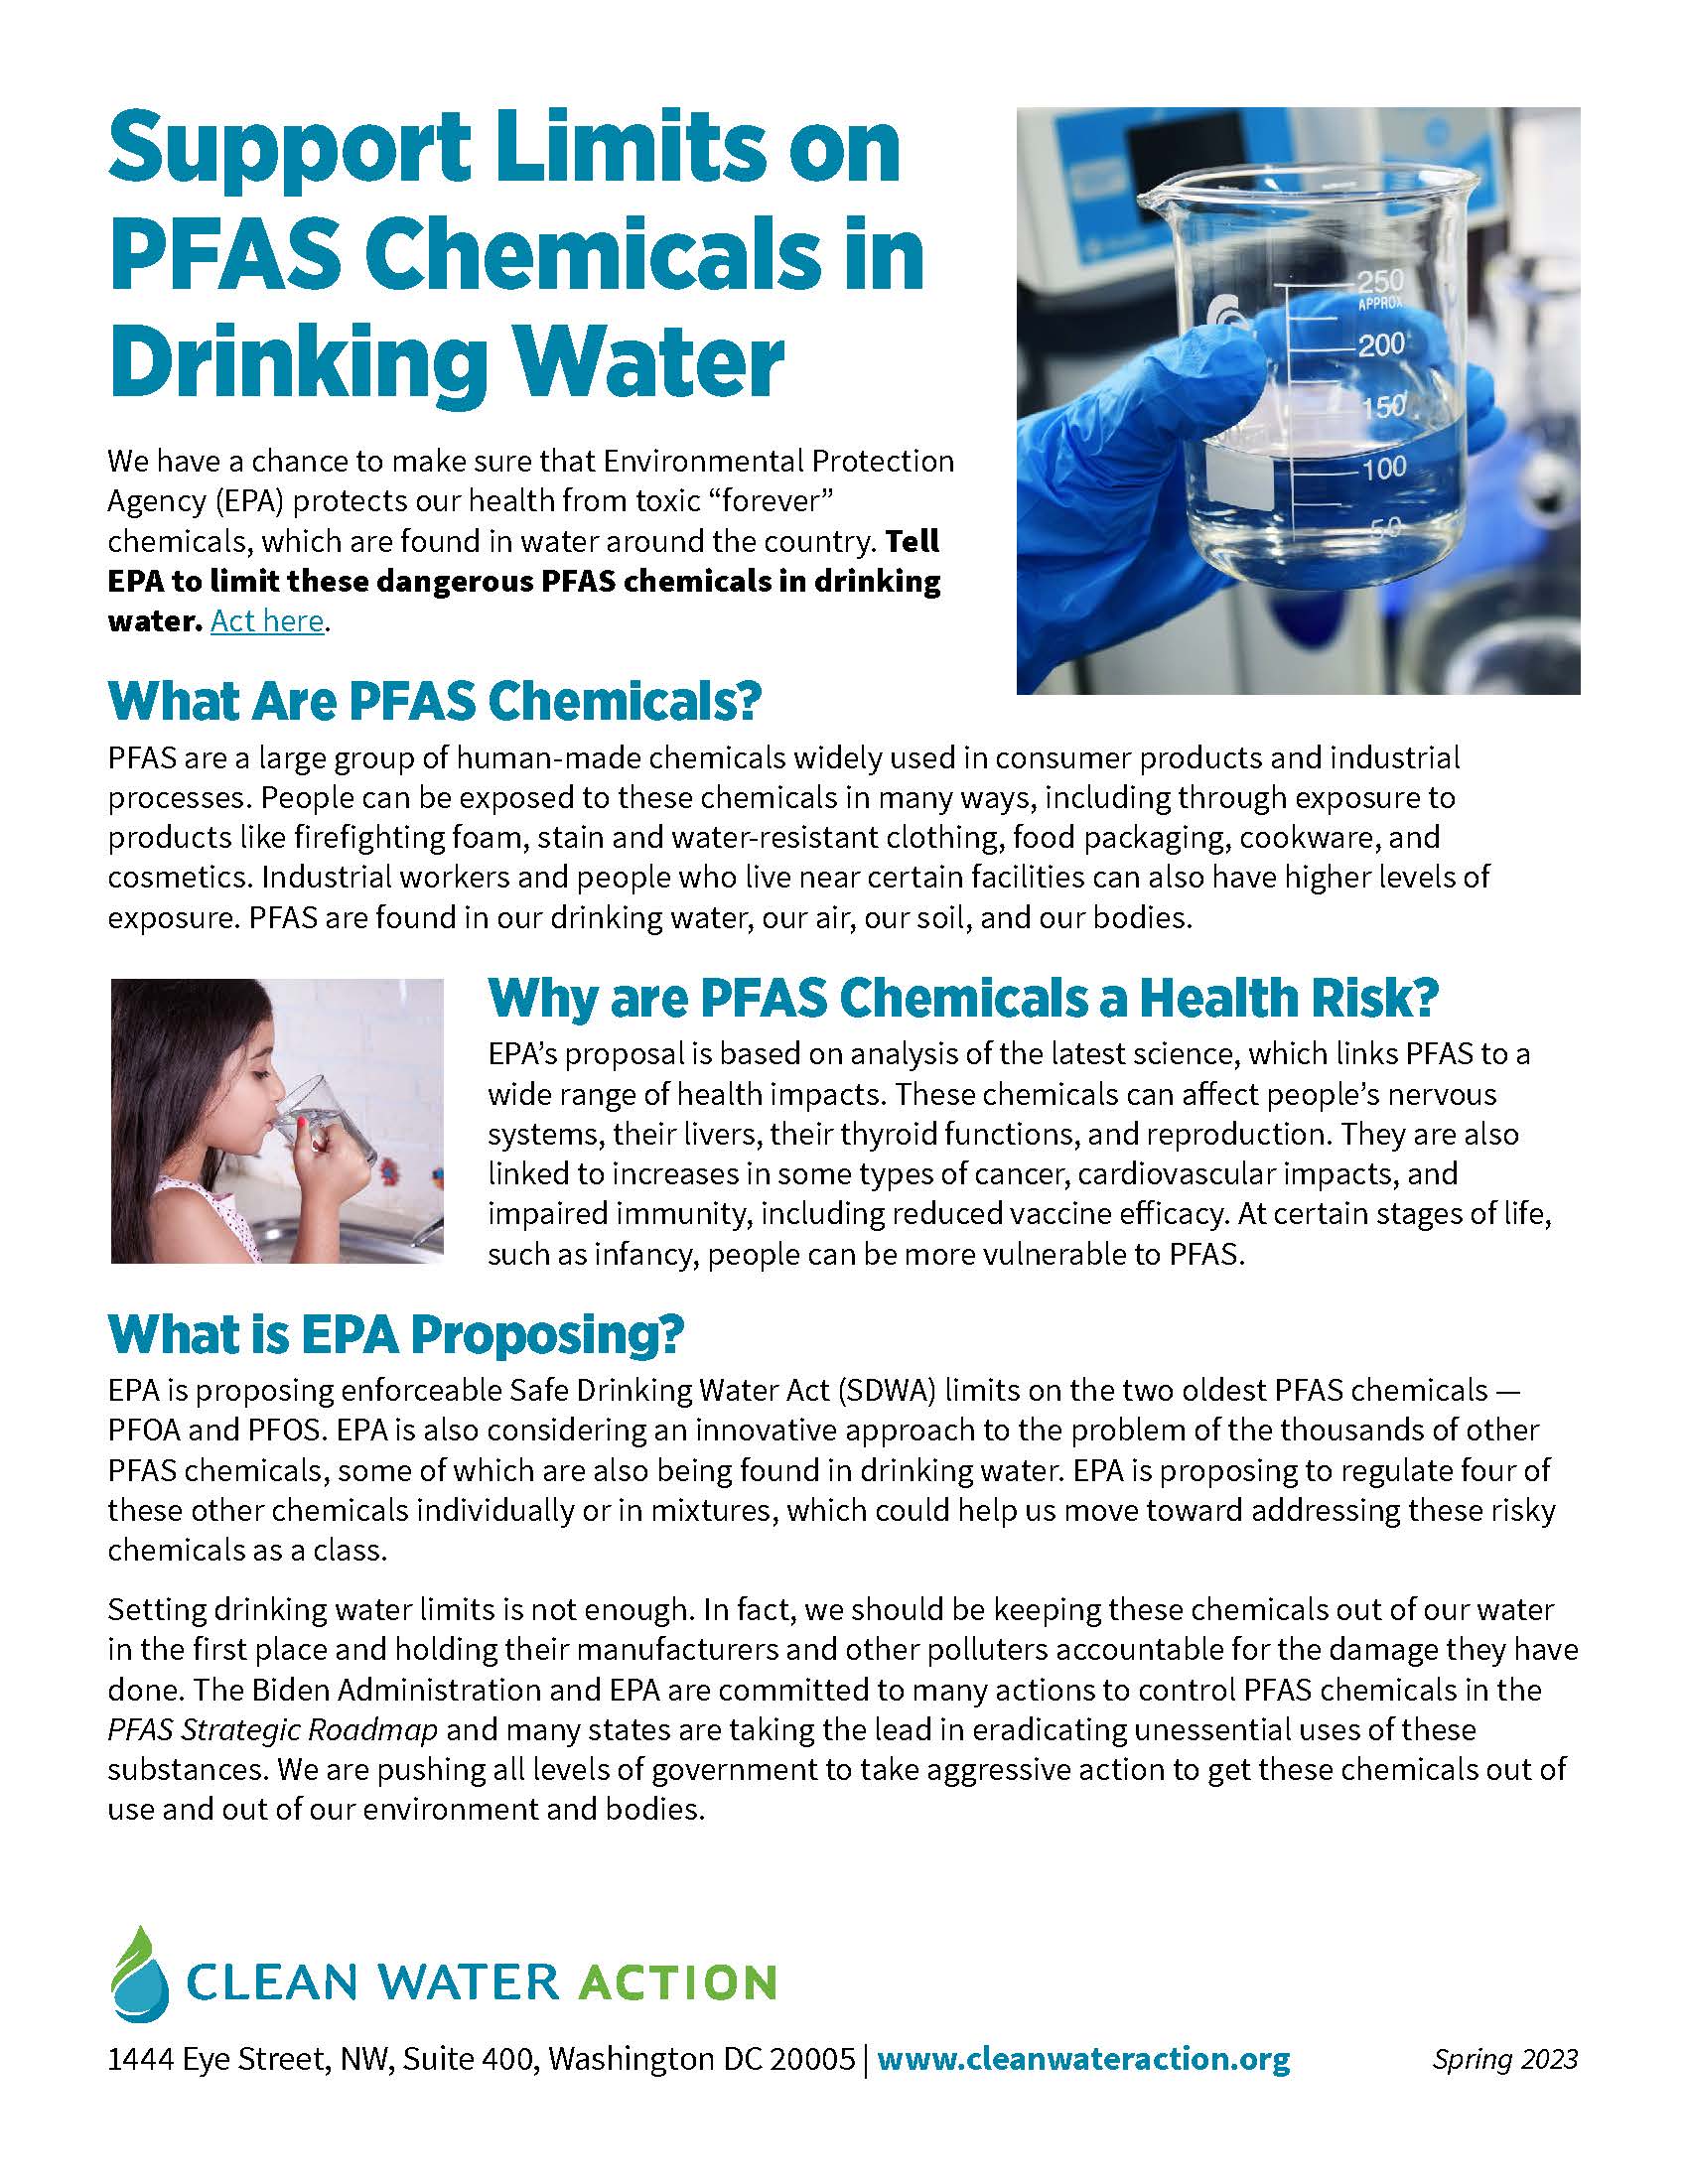 Support Limits on PFAS Chemicals In Drinking Water | Page 1